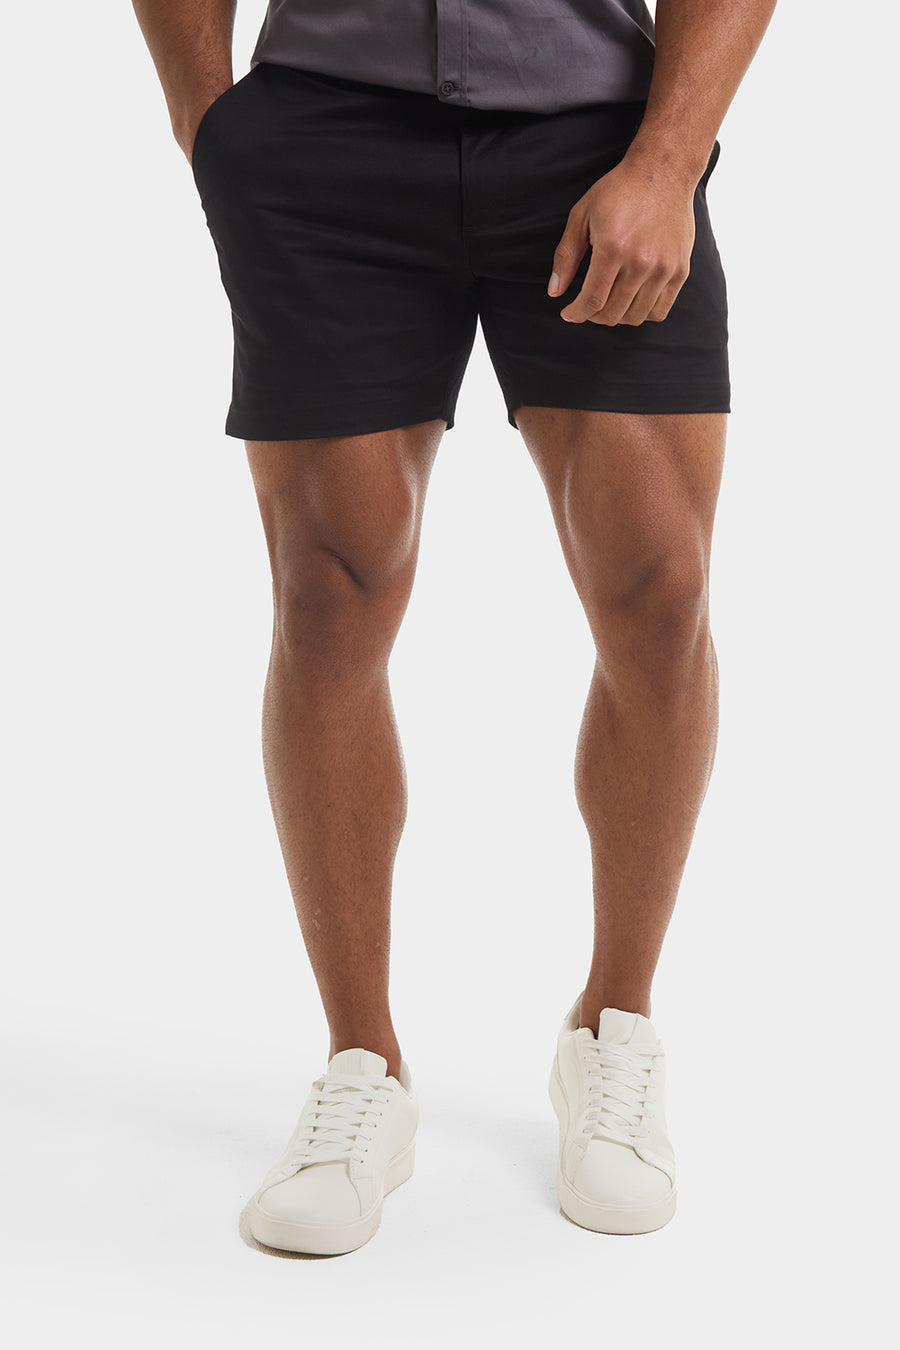 Athletic Fit Chino Shorts 5'' in Black - TAILORED ATHLETE - USA